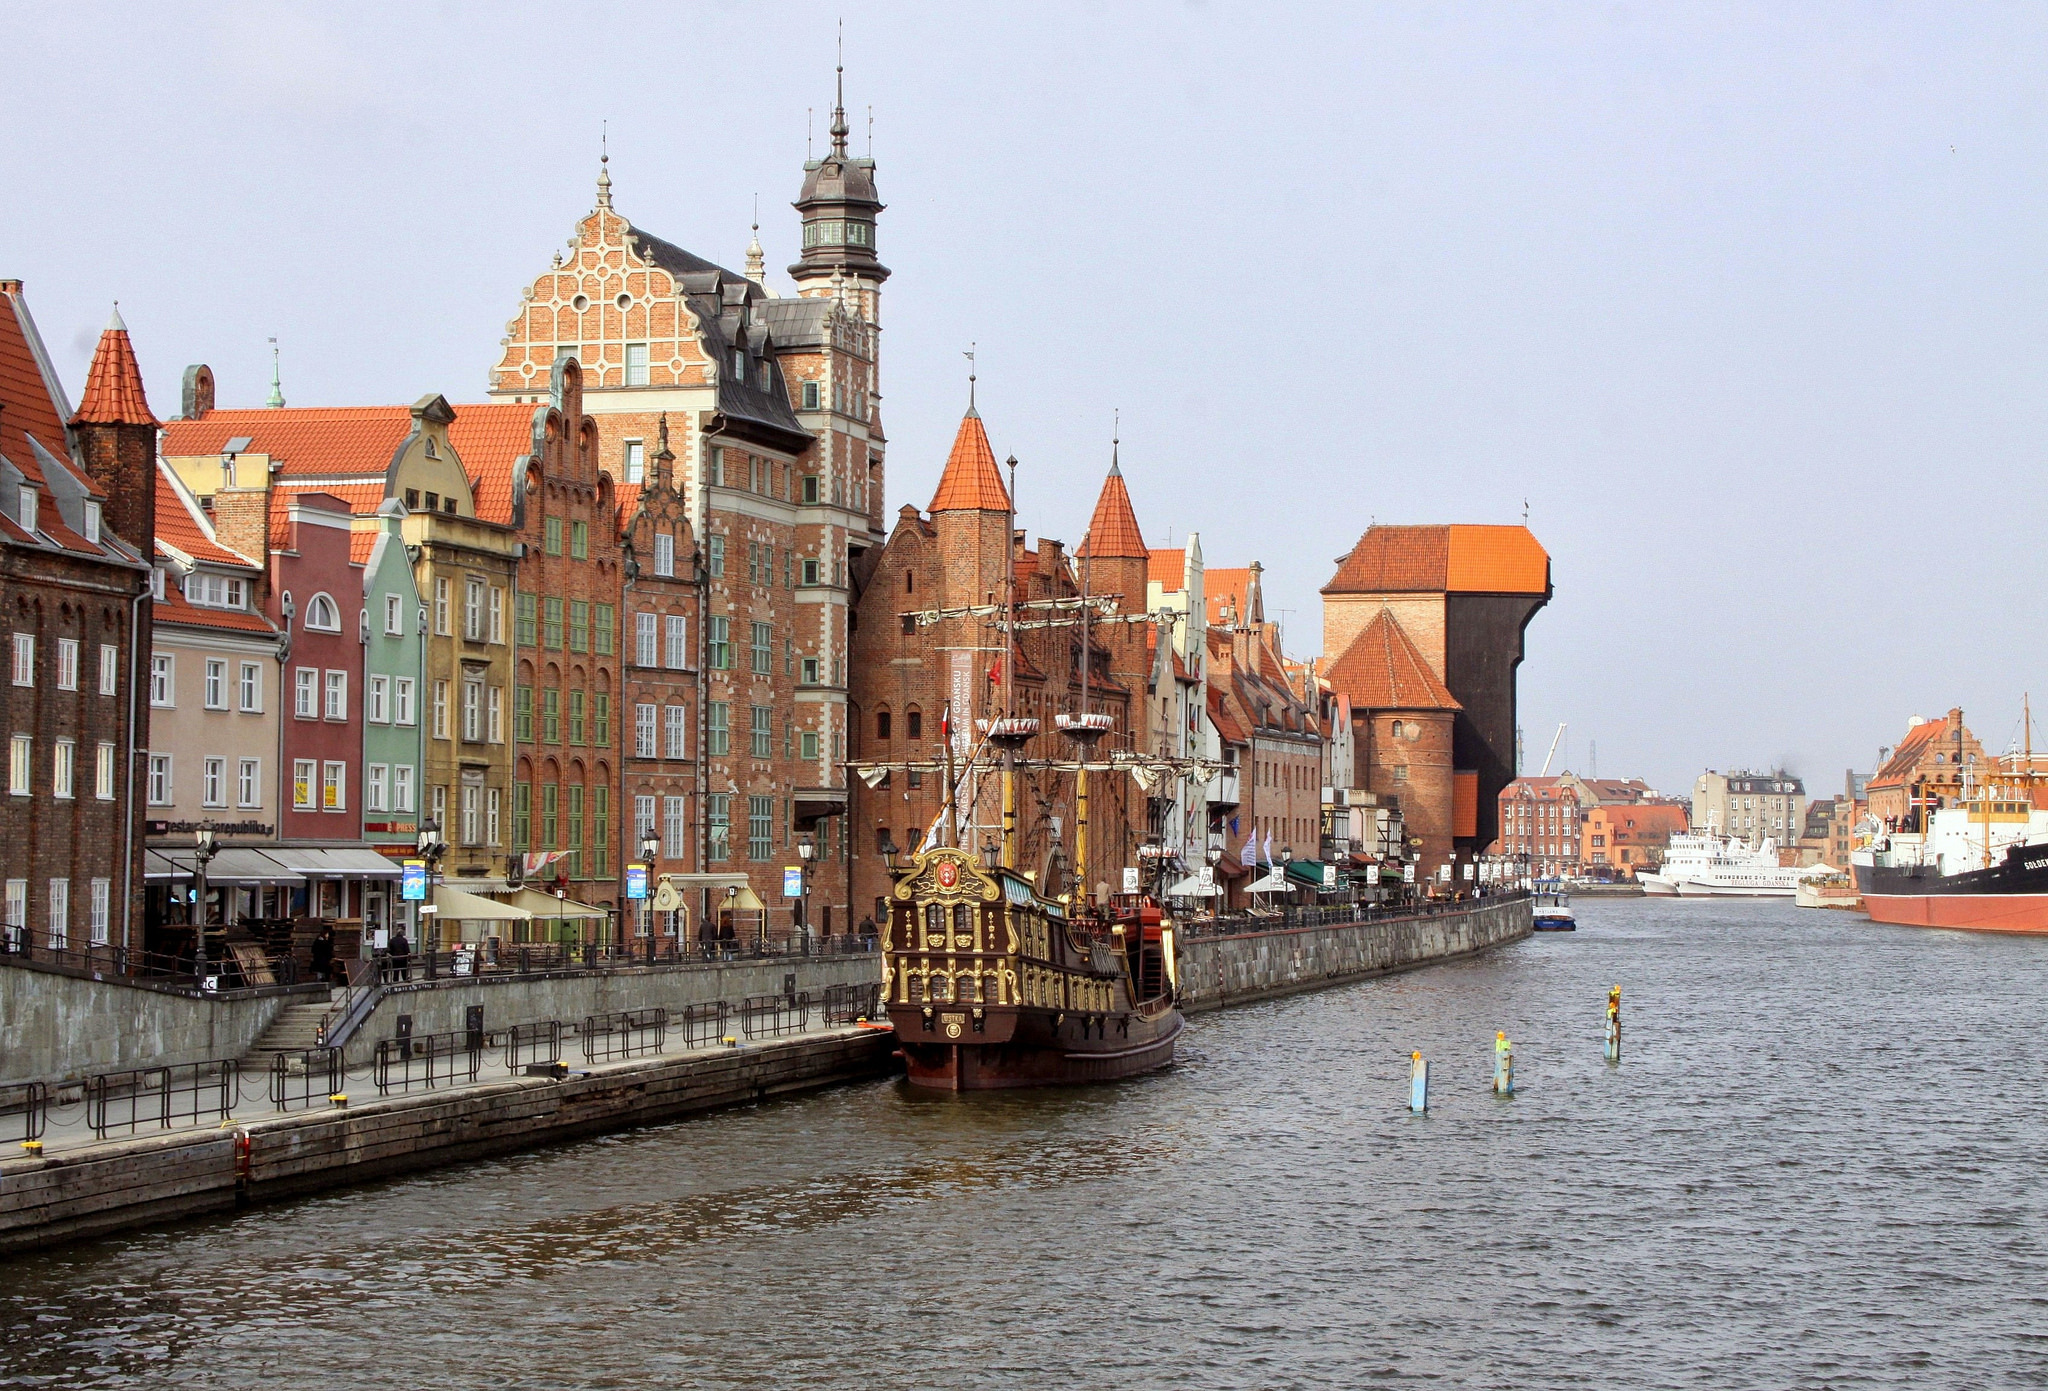 poland, man made, gdansk, boat, city, house, river, towns